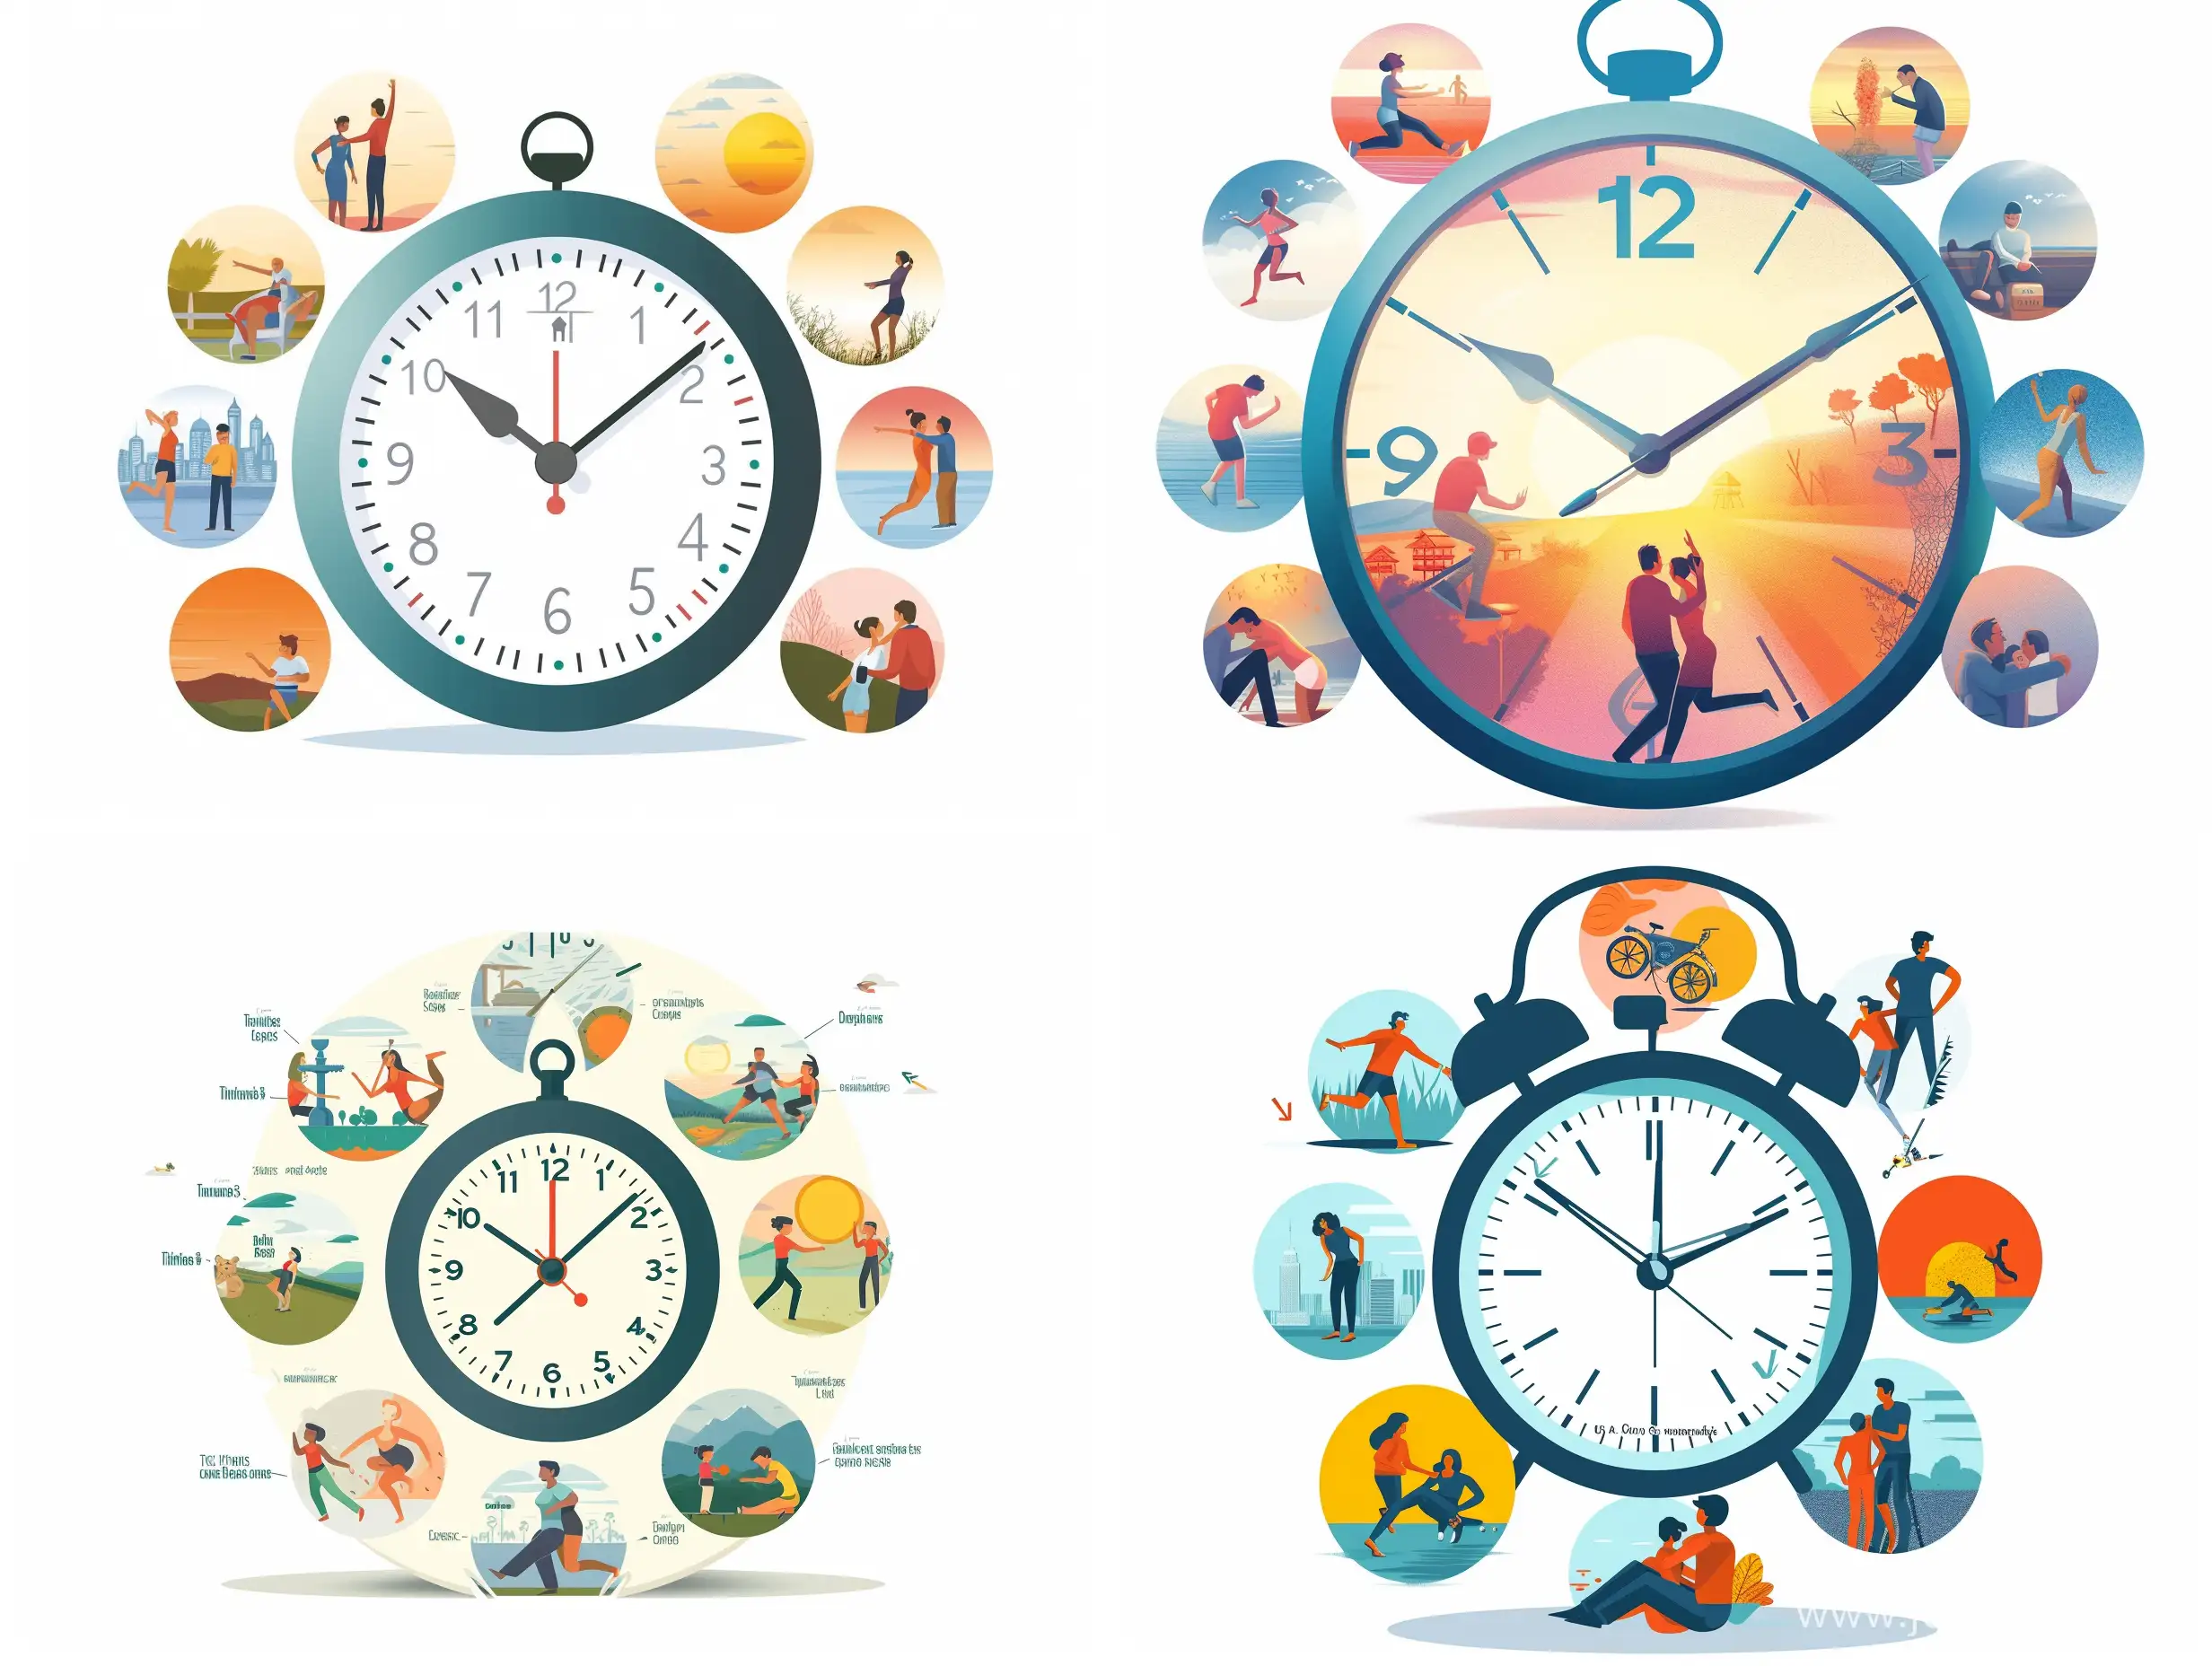 Create an image that represents the theme of 'Timeliness'. Think about moments of timely actions, decisions, caring for one's health, and expressing emotions. The image should feature a clock with hands pointing to a specific time. Around the clock, include various scenes that illustrate the concept of timeliness. One scene could depict a person engaging in morning exercise to emphasize the importance of health care. Another scene could show a couple embracing at sunset to symbolize the timely expression of emotions. Additionally, depict a scene where a person is making an important decision and another scene where someone is helping another person in a difficult situation, highlighting the significance of timely actions. The clock should be the central focus of the image, reinforcing the main theme of the contest - timeliness.